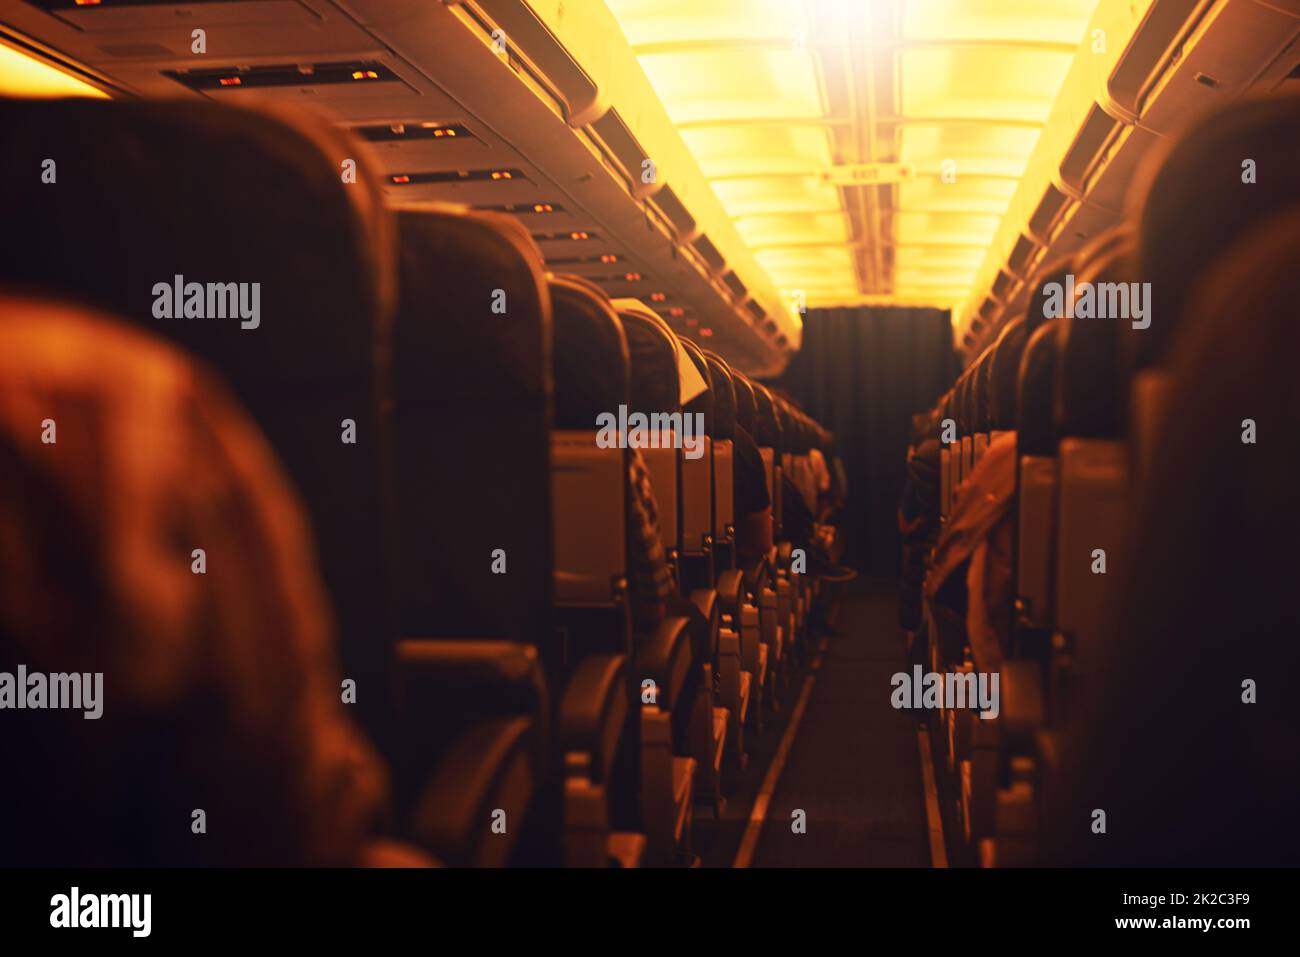 Time to jet off and explore the world. Shot of passenger seating inside an airplane. Stock Photo